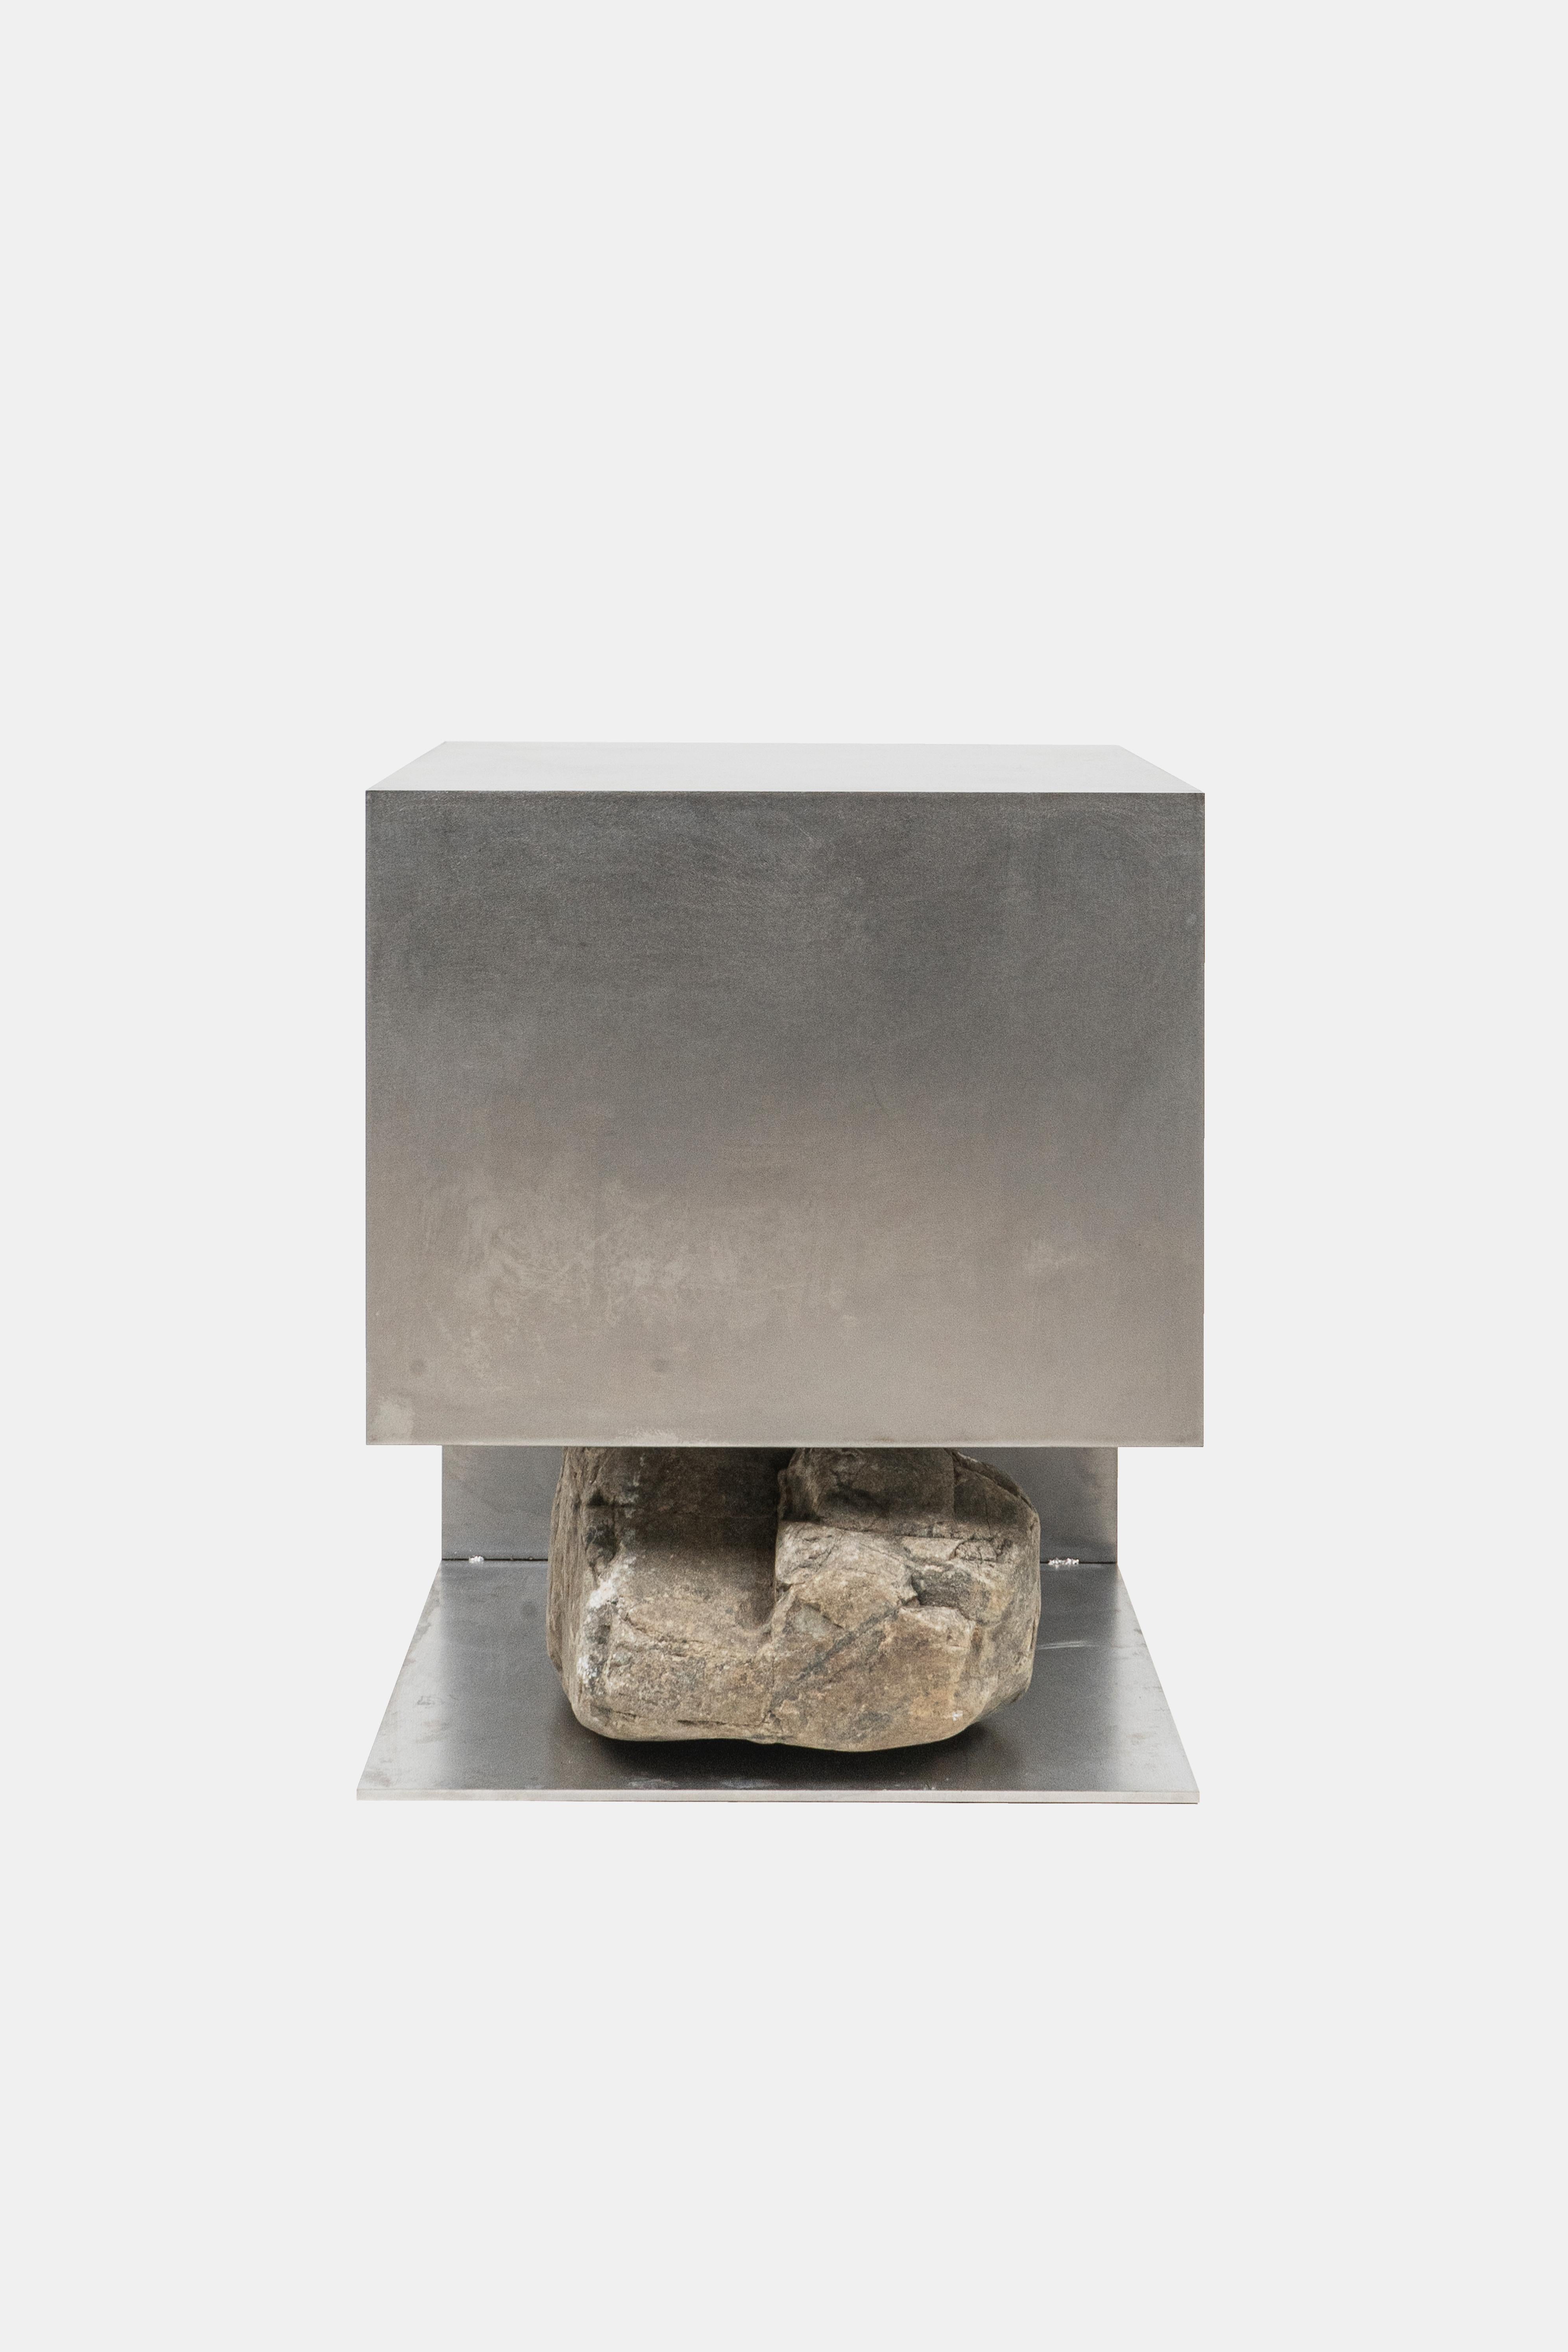 Modern Proportions of Stone Stool by Lee Sisan